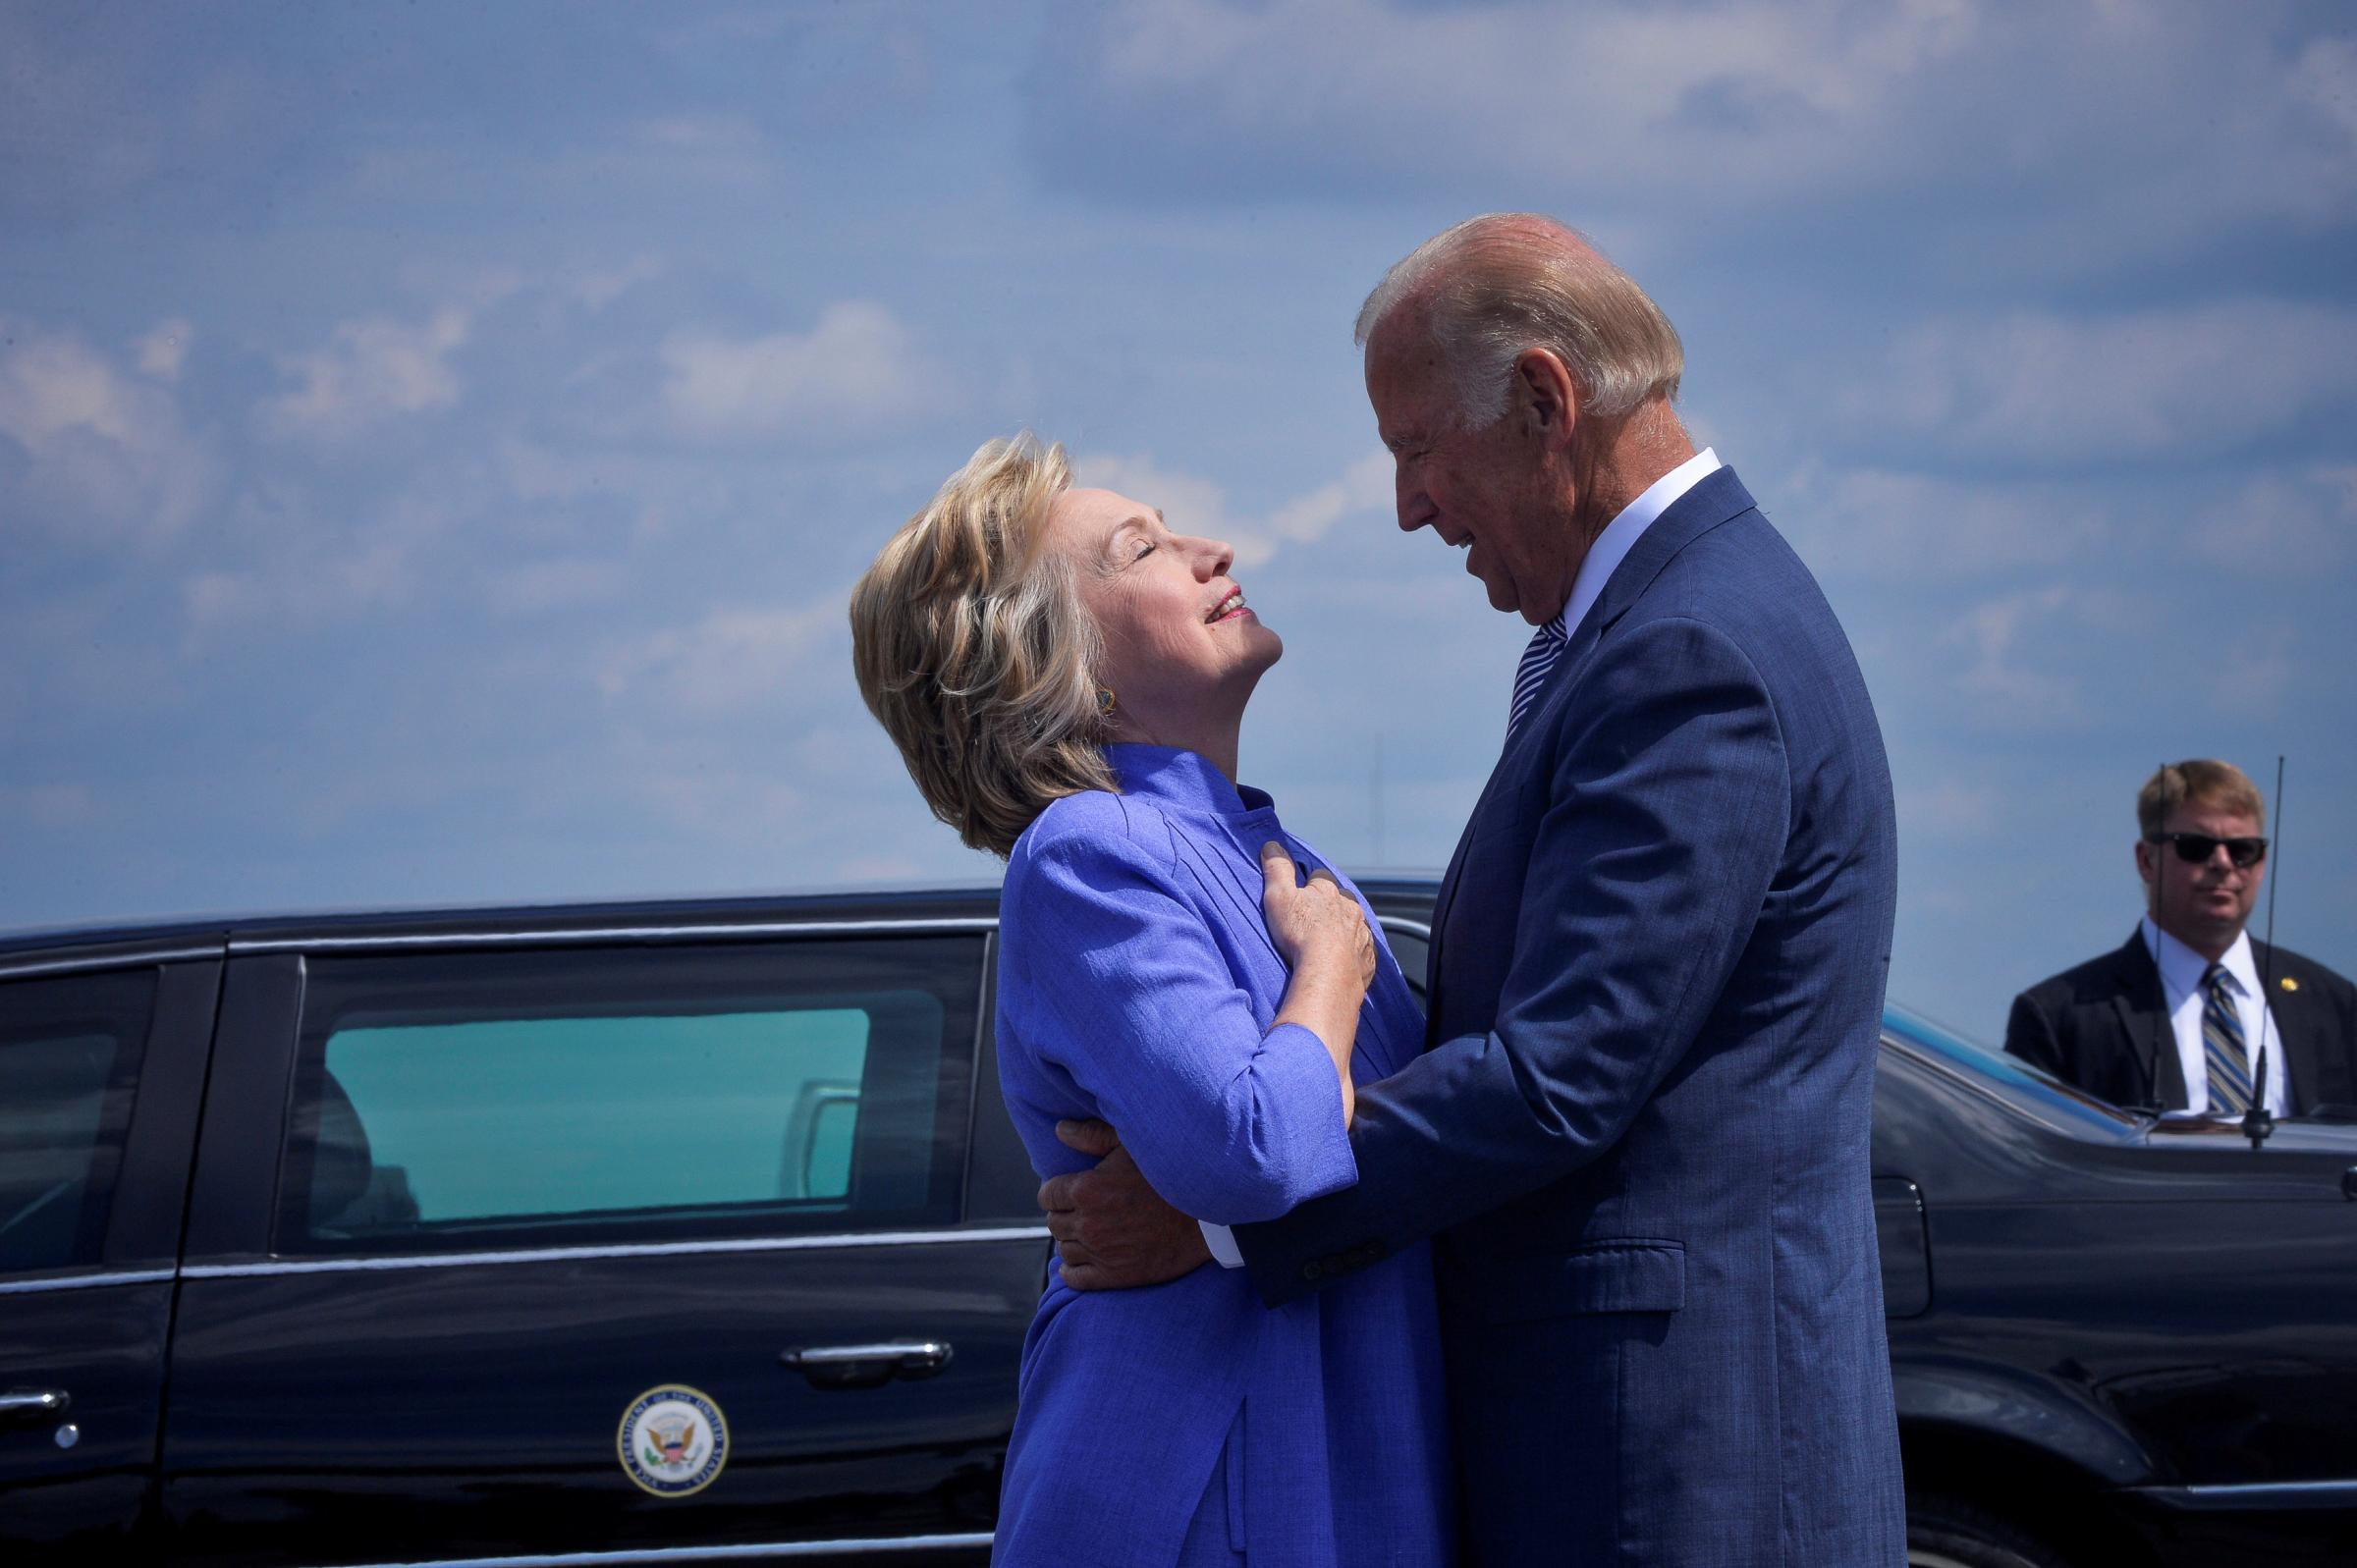 Democratic presidential nominee Hillary Clinton welcomes Vice President Joe Biden as he disembarks from Air Force Two for a joint campaign event in Scranton, Pennsylvania